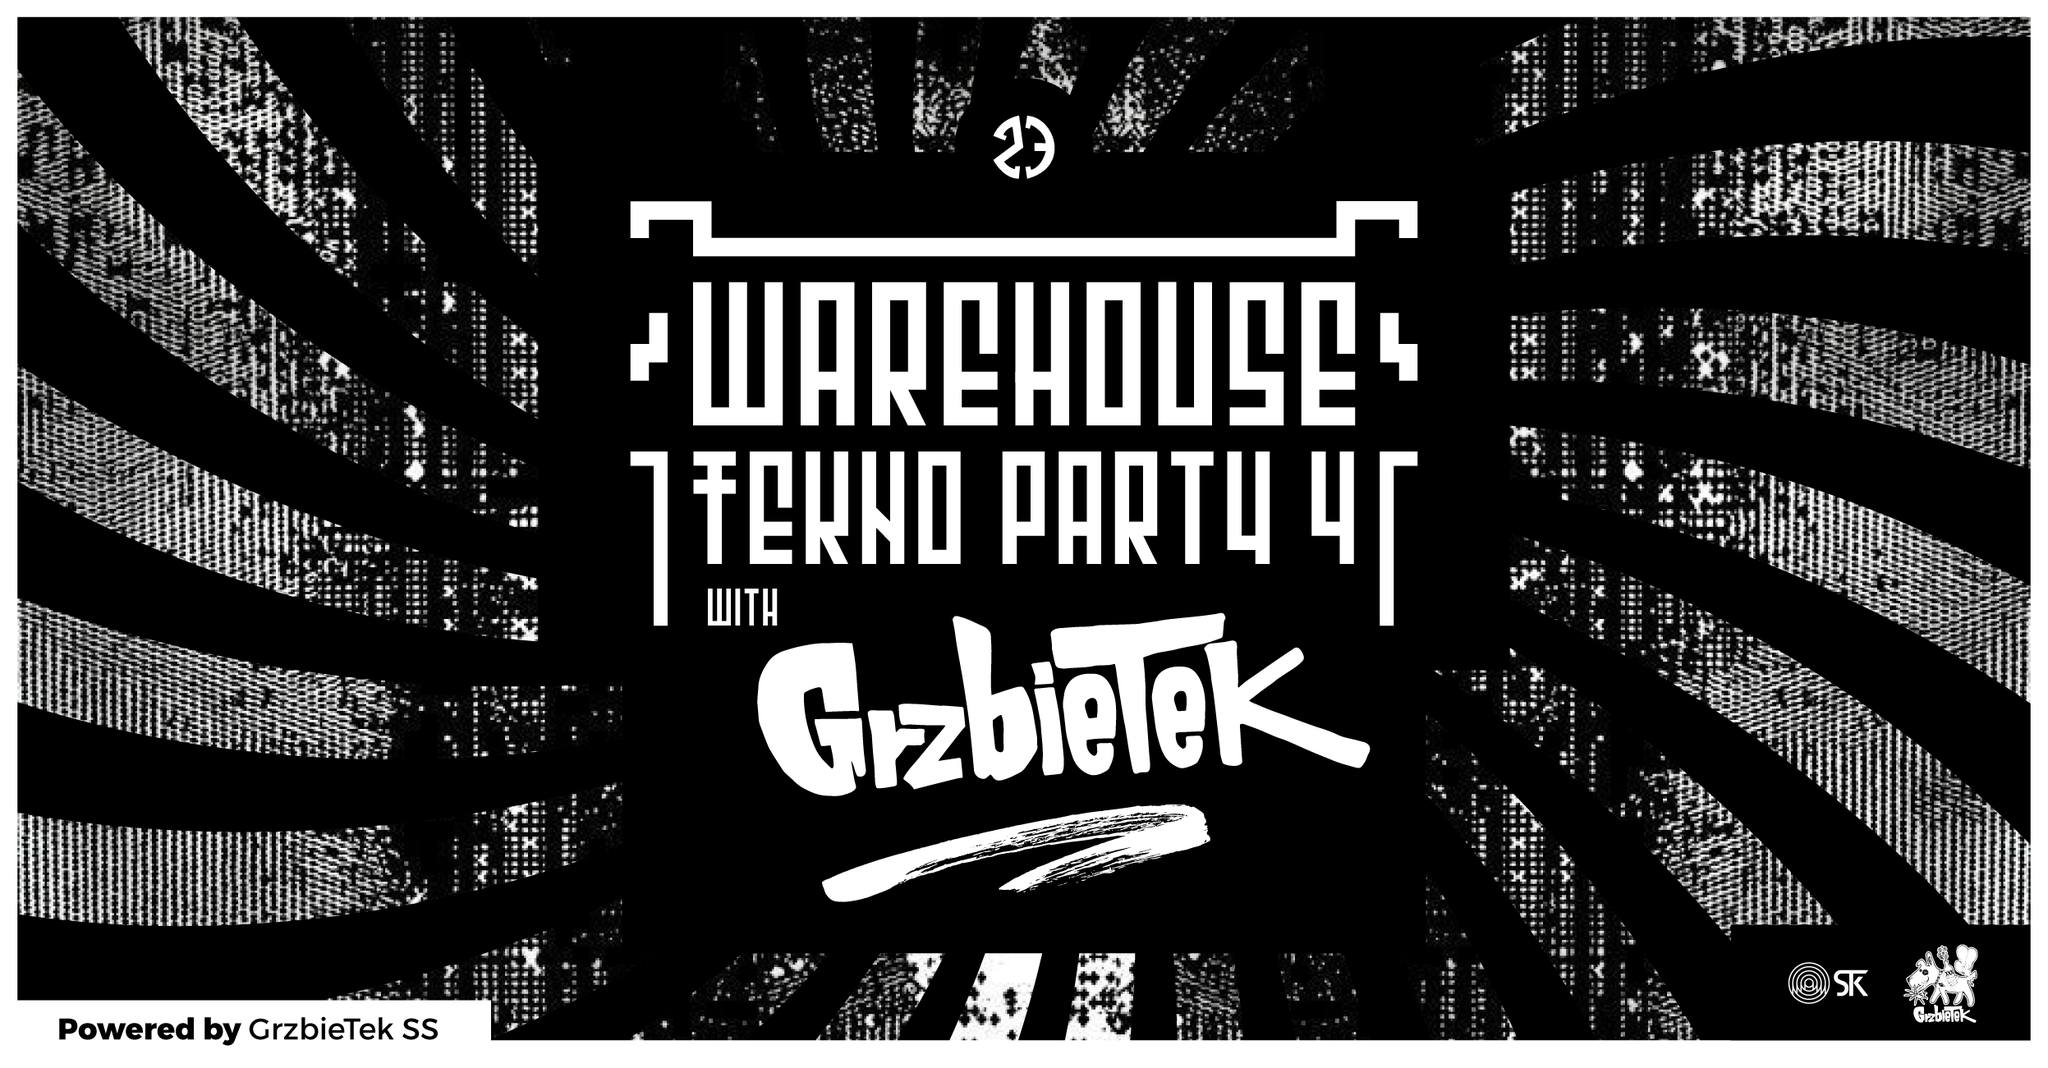 Warehouse Tekno Party #4 with GrzbieTek